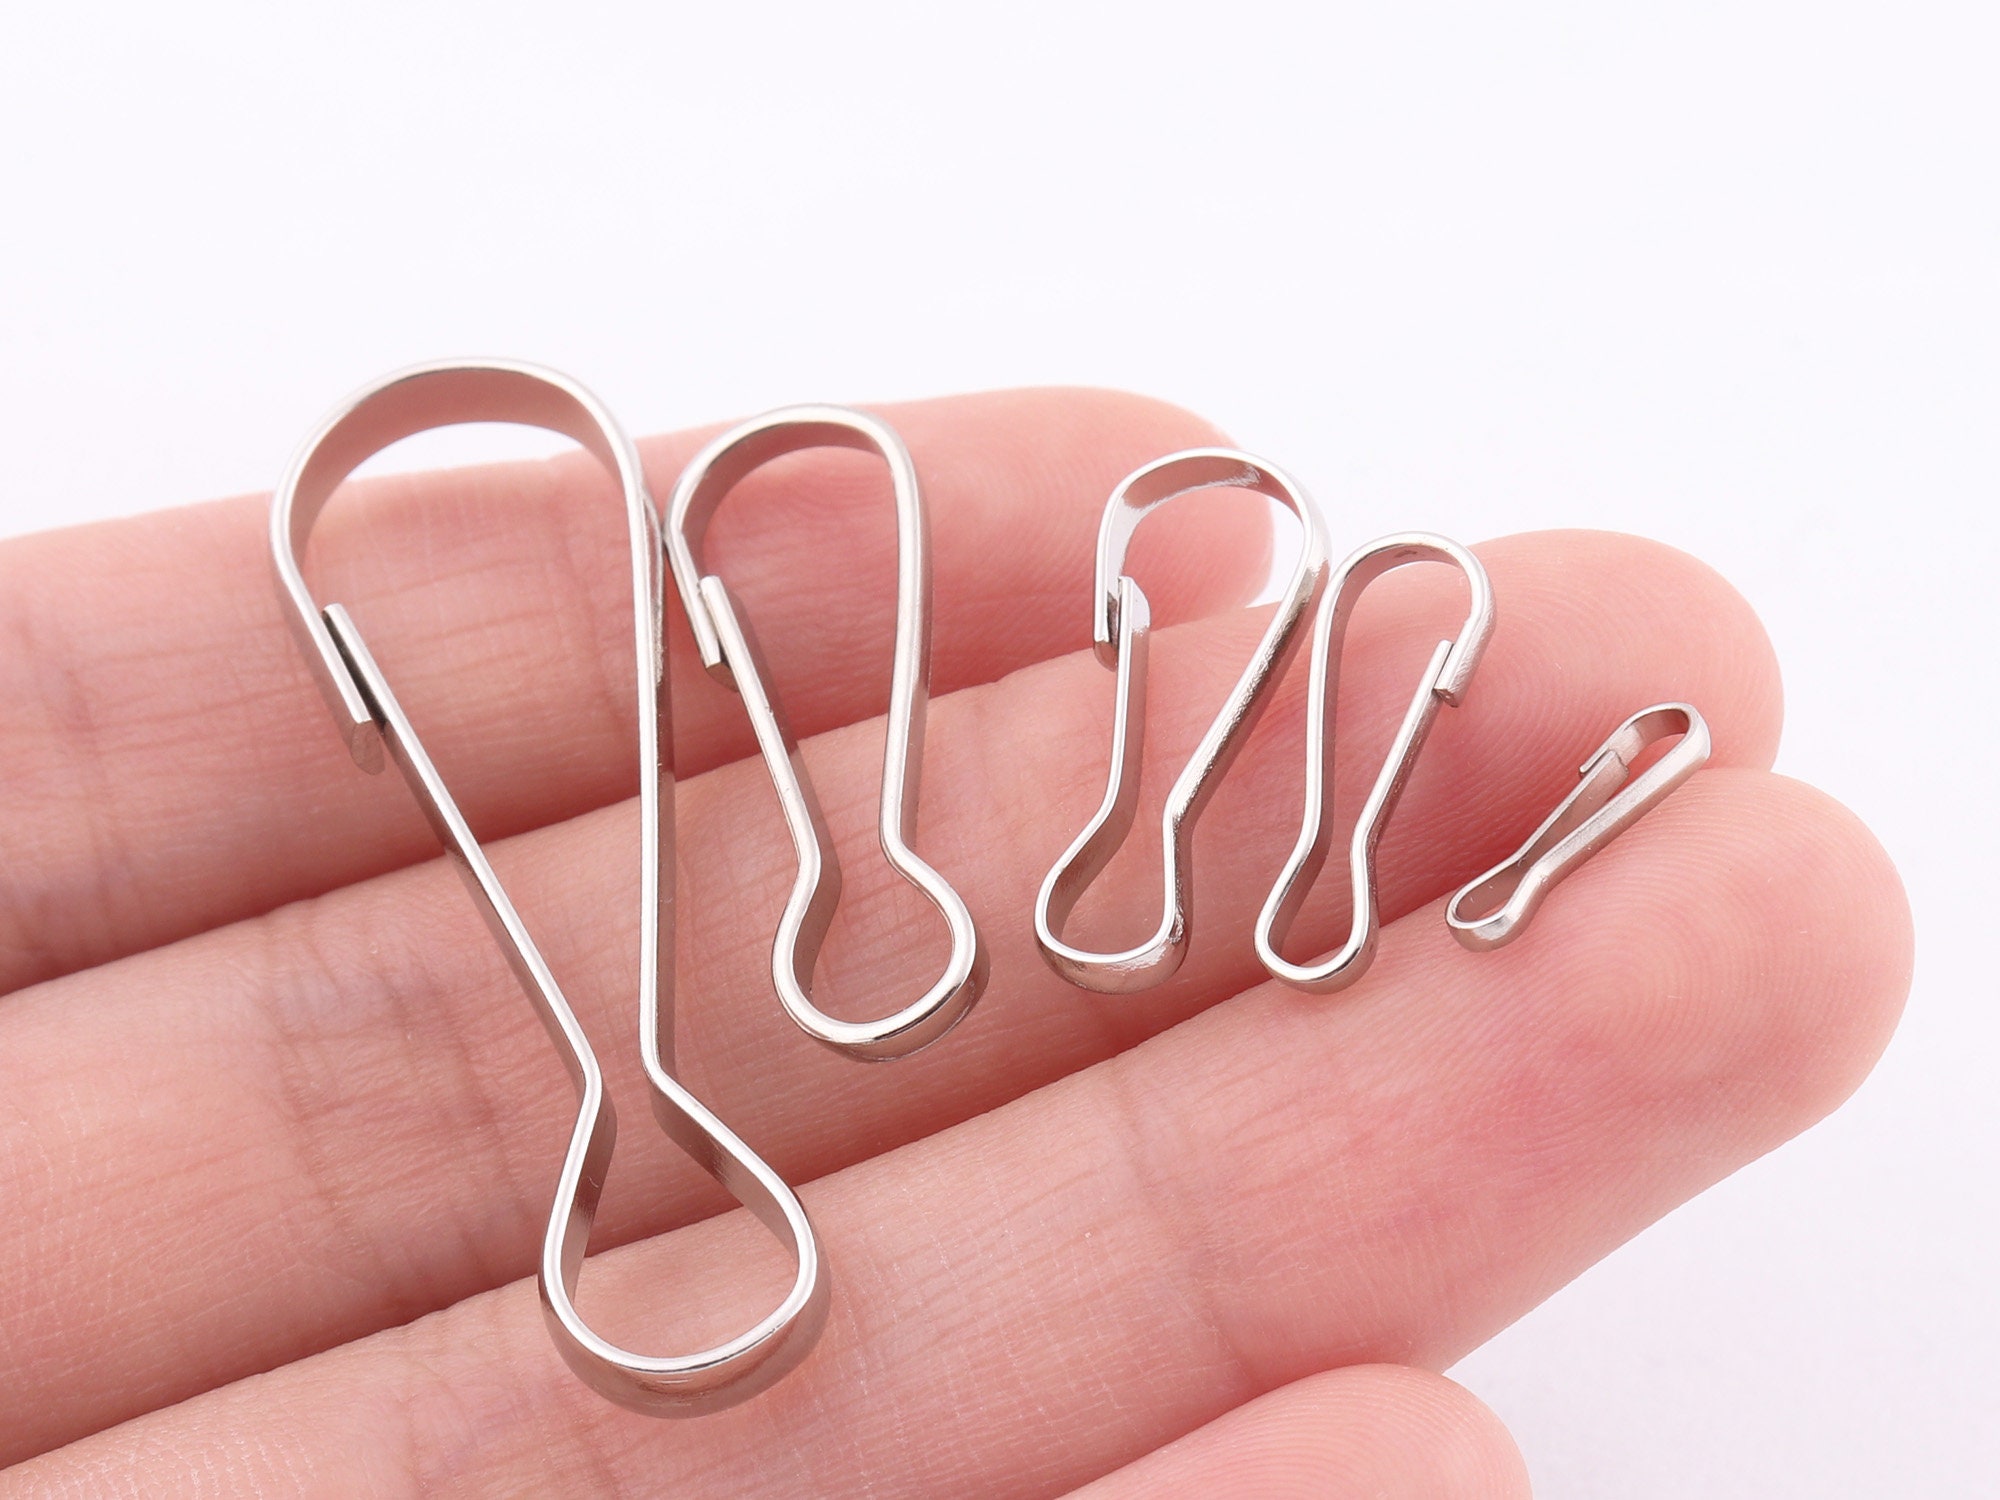 10 Small Metal Spring Clips Free Shipping 1 1/4 Inch J Hook Clasp DIY Face  Mask Lanyard for Beading or Paracord Zipper Pulls 